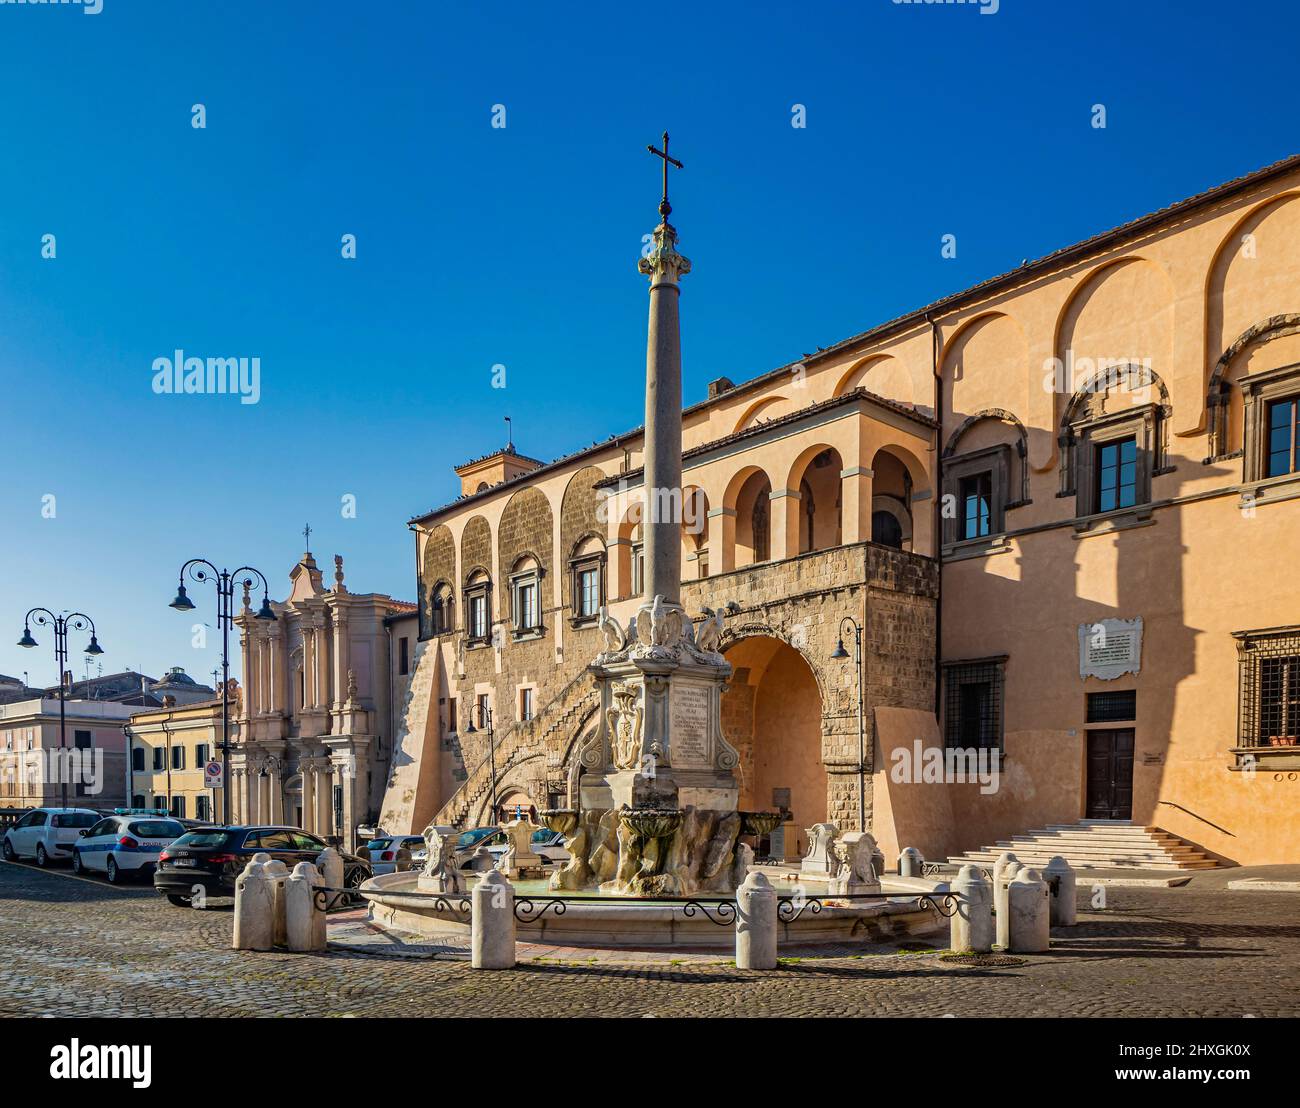 Feb.6, 2022 - Tarquinia, Viterbo, Lazio, Italy - The main square of the village. The circular fountain with the obelisk and the cross. The town hall i Stock Photo